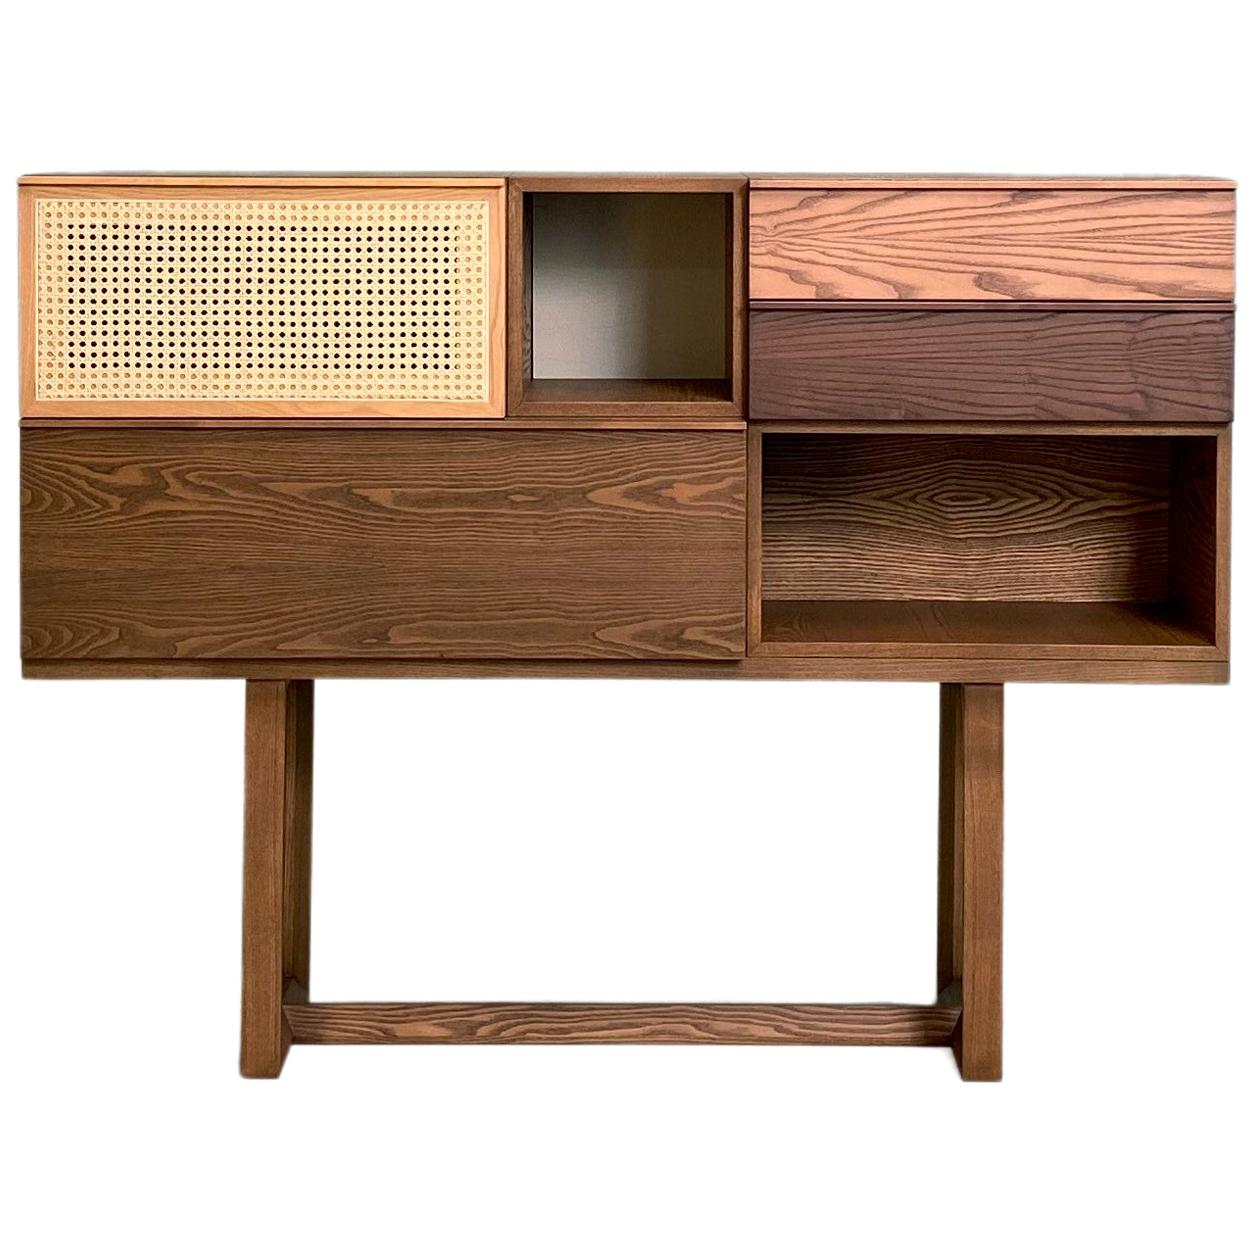 Morelato - Swing Cabinet and consolle